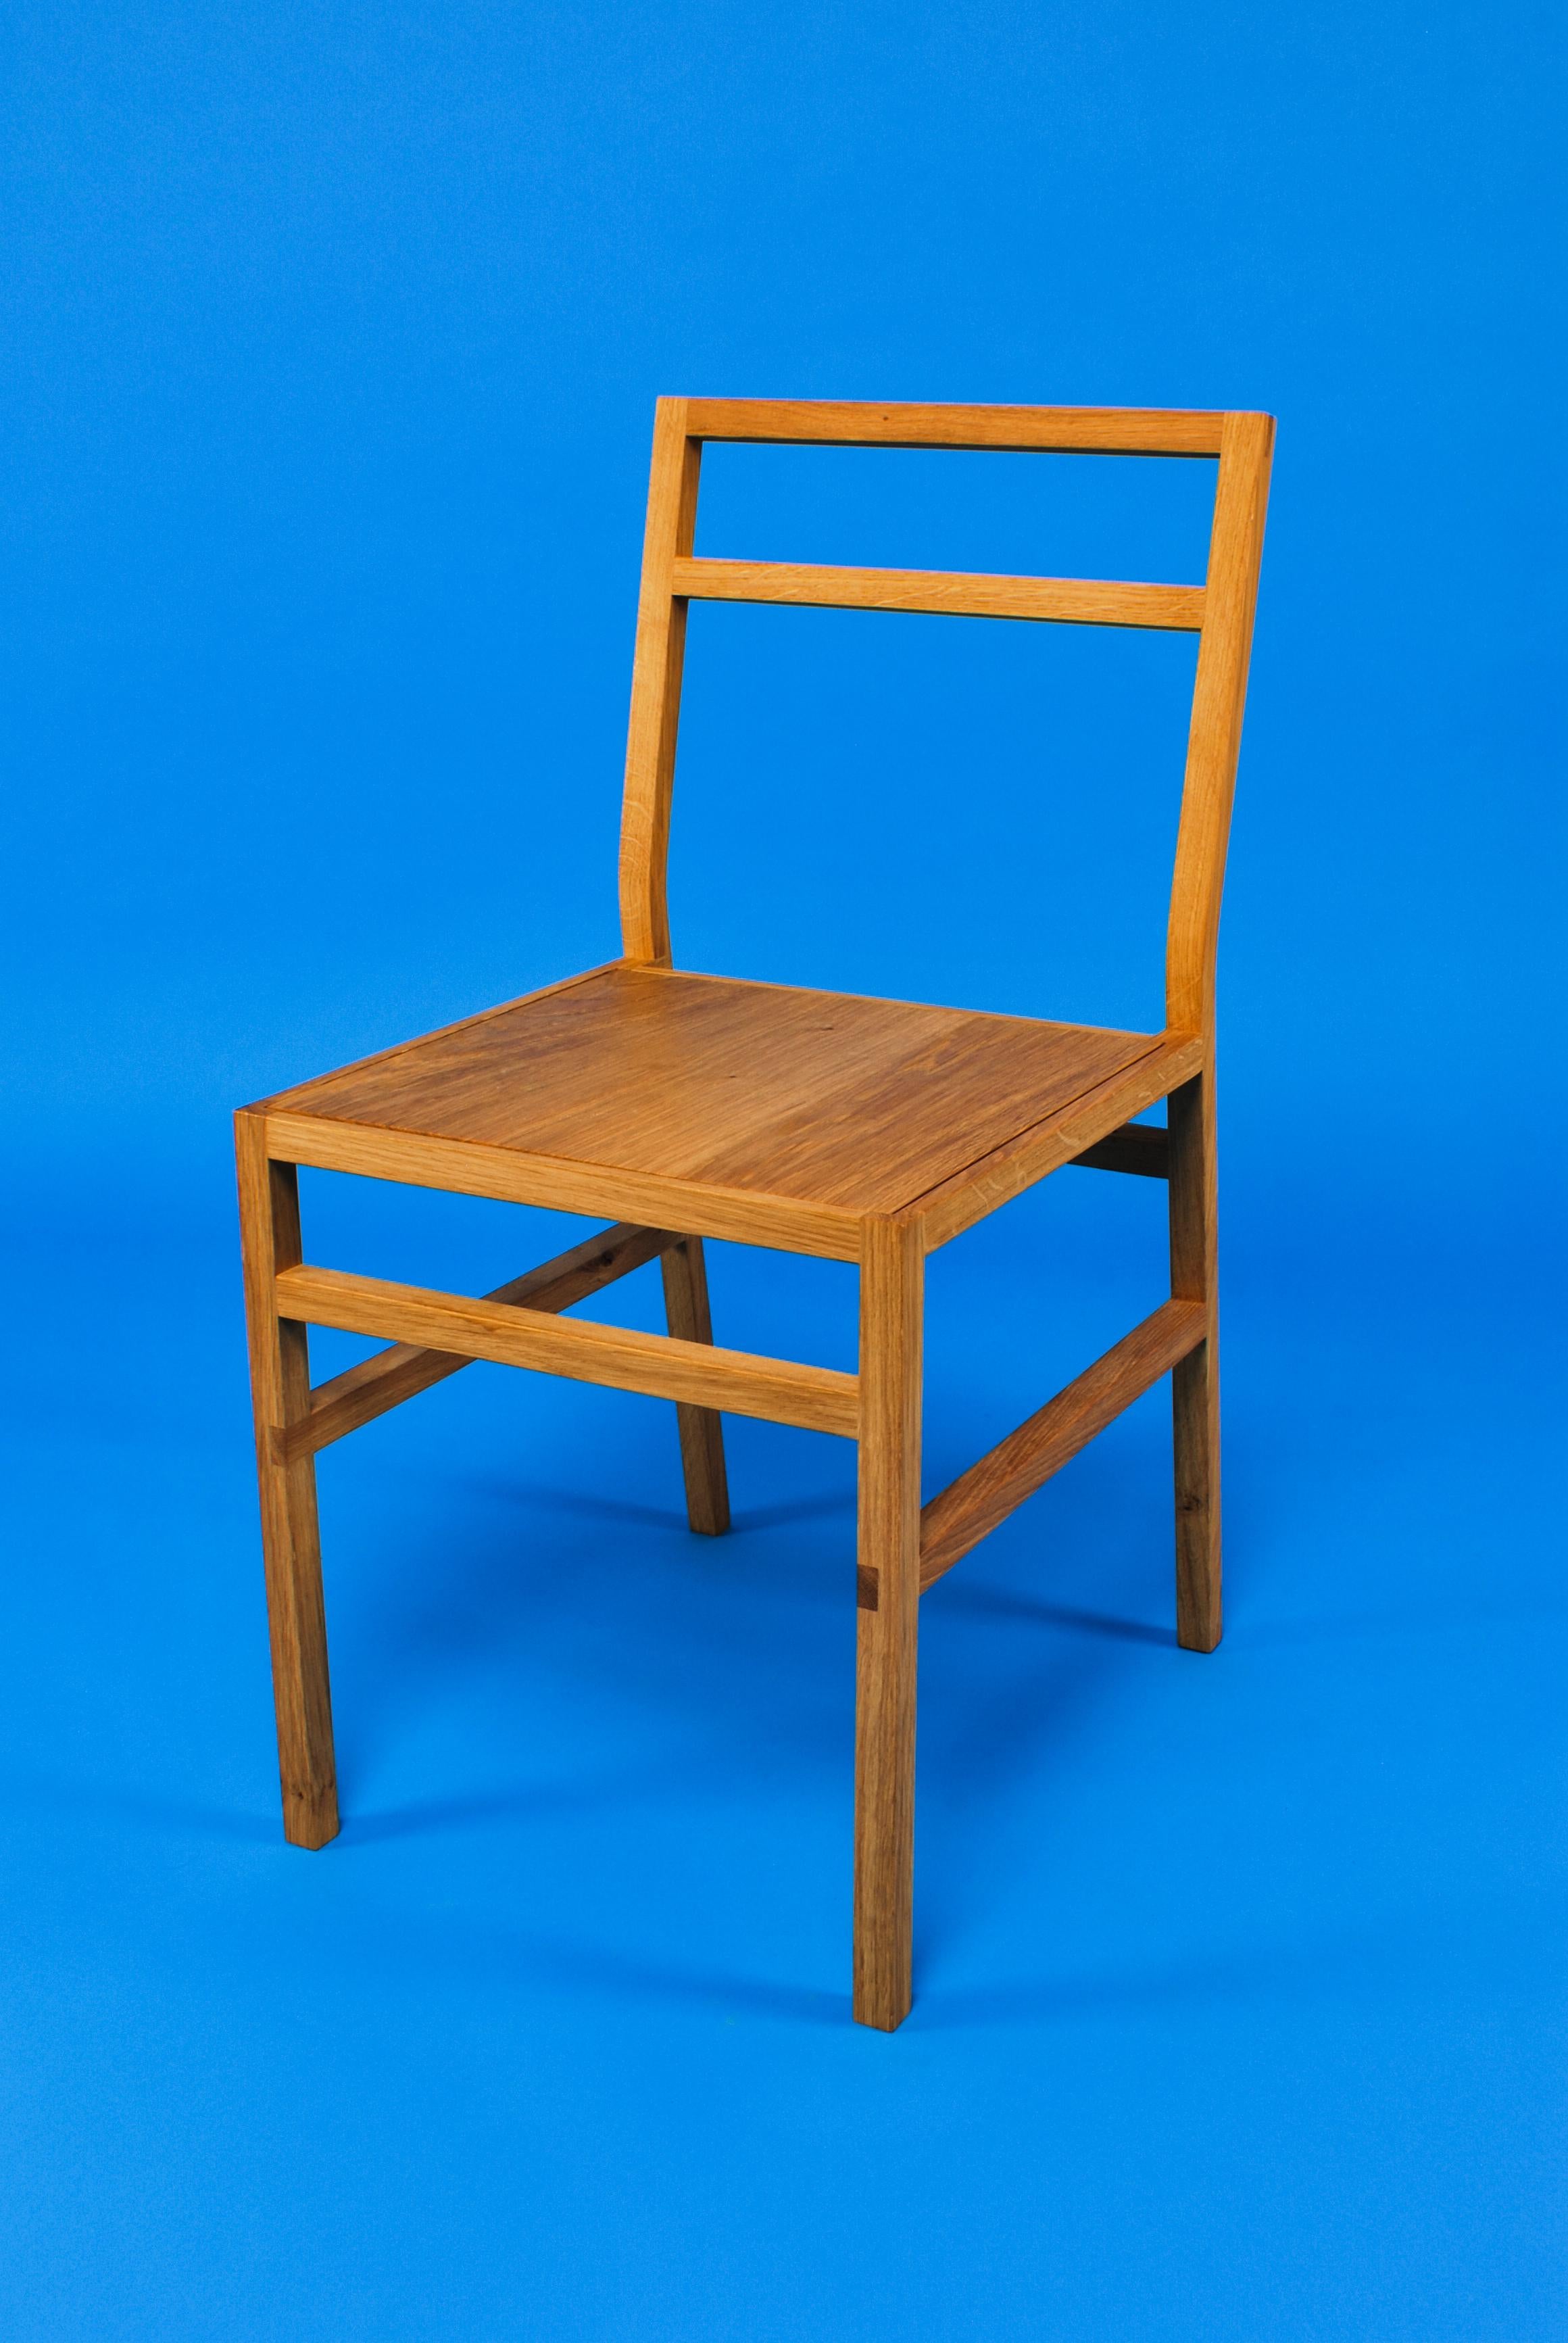 Organic Modern Dining Chair. Created by Loose Fit and handmade to order in the UK. Available in a choice of three timbers - English Oak, Ash or London Plane.

Simple Oak Dining Chair. Delicate in appearance yet comfortable and durable enough for